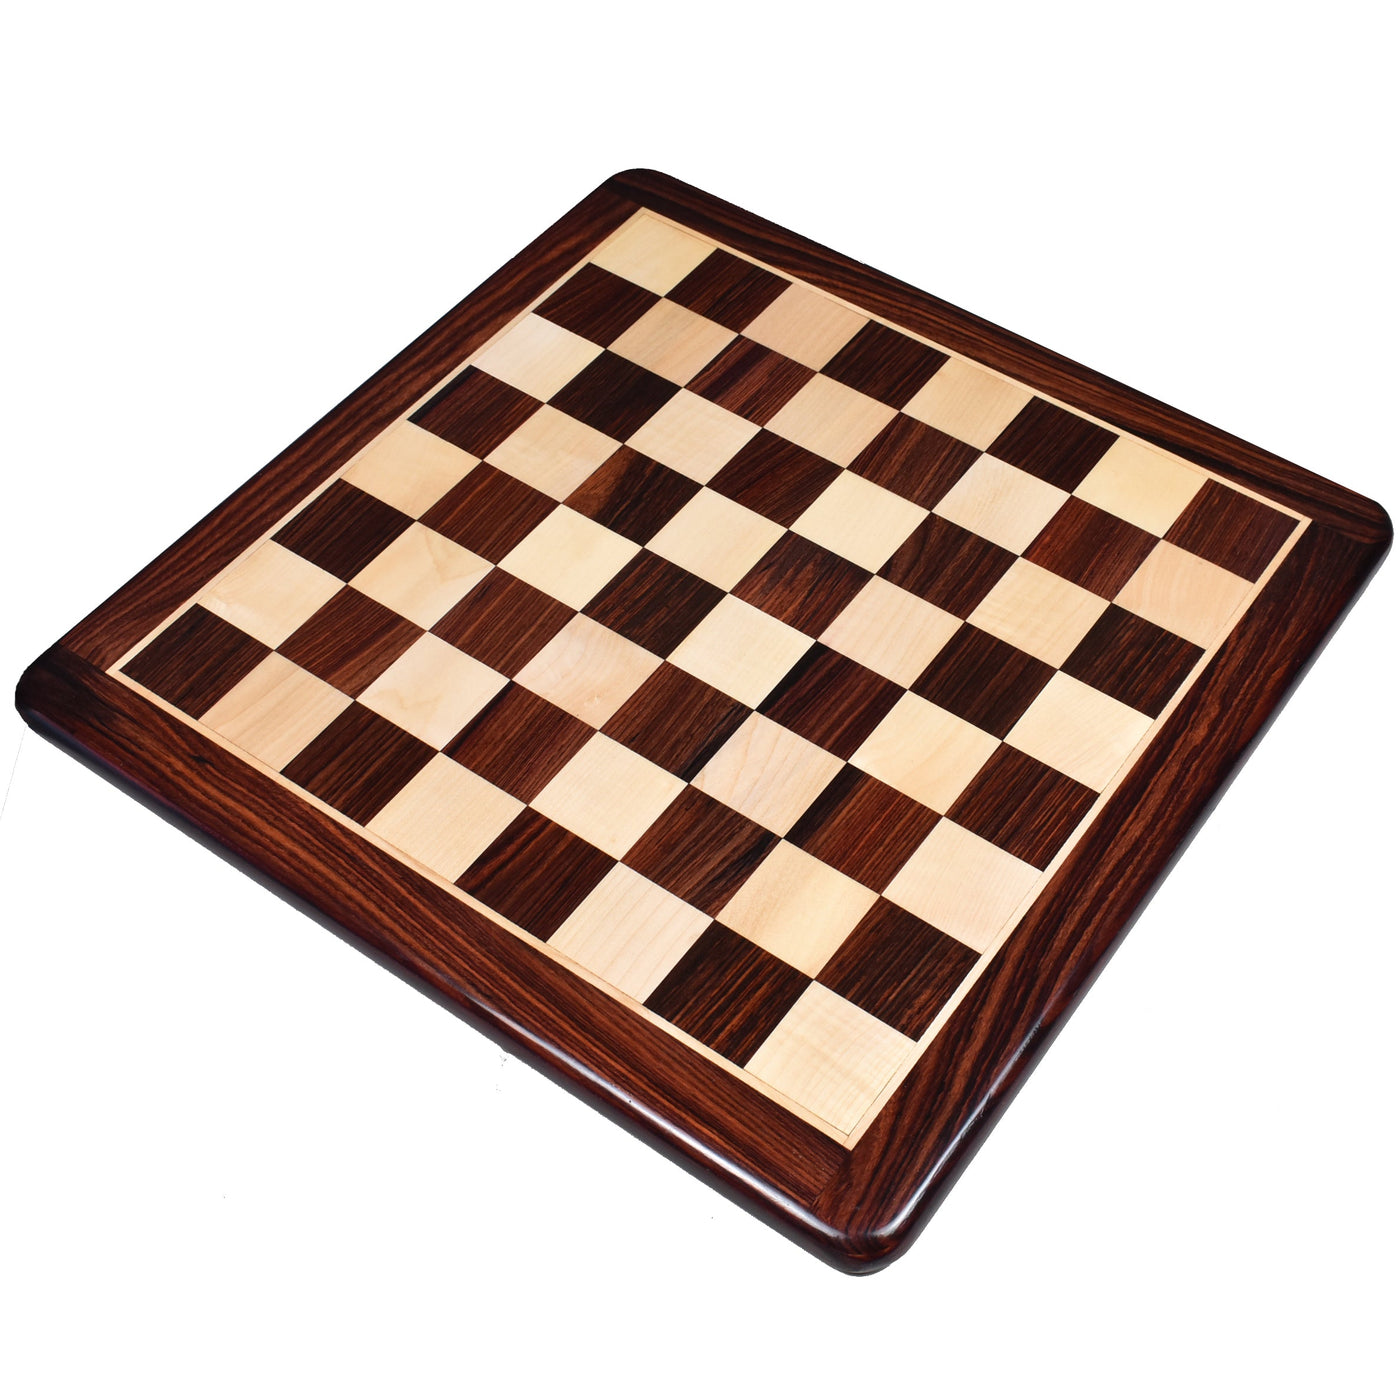 Combo of 3.9" Exclusive Alban Staunton Chess Set - Pieces in Rosewood with Board and Box